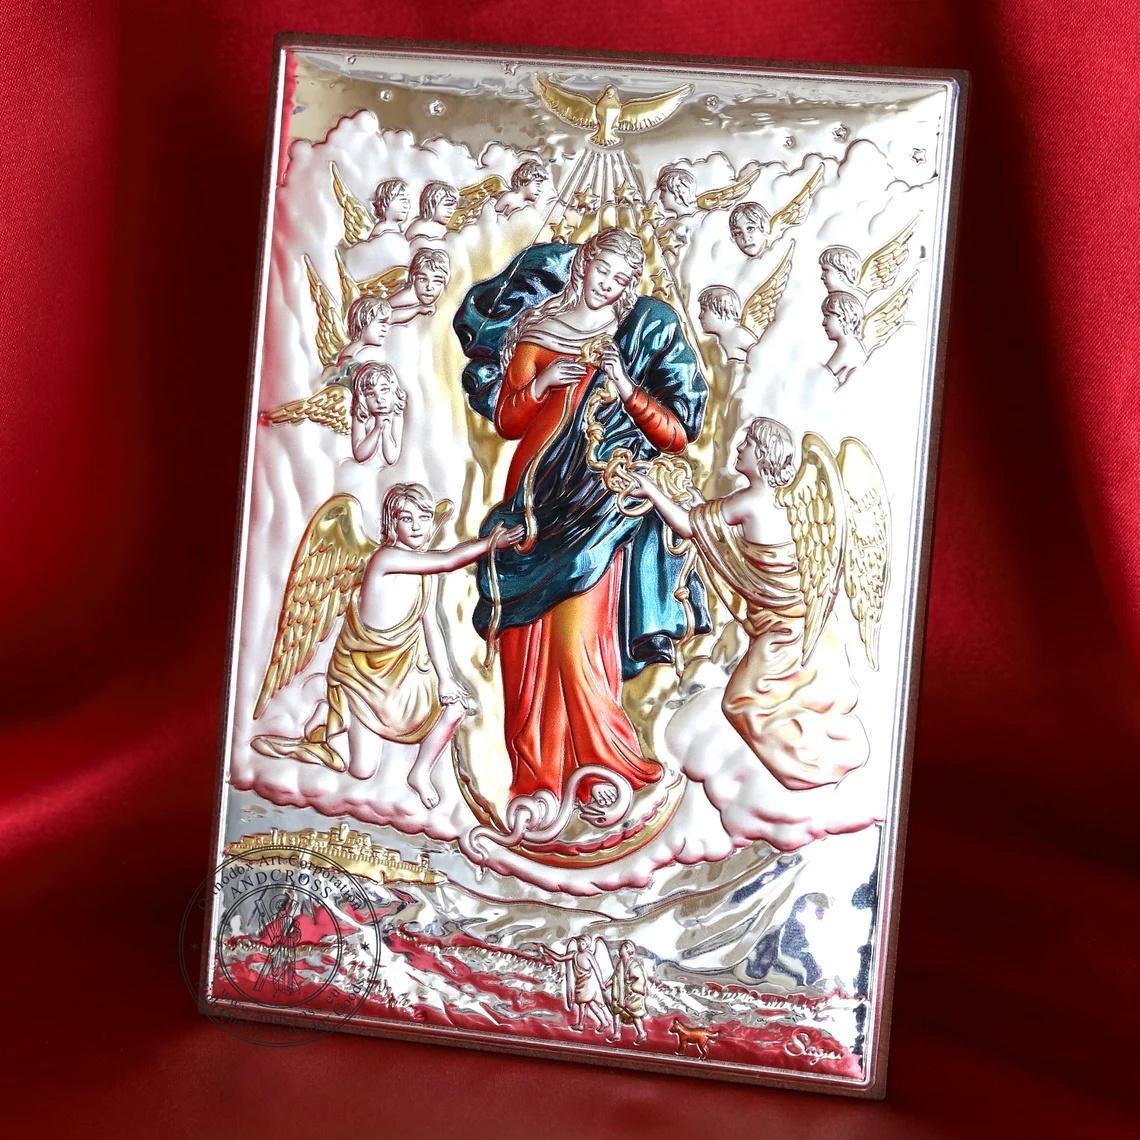 About the Icon Of Mary Untier the Knots. Buy The Quality Replica Of The Baroque Painting Online